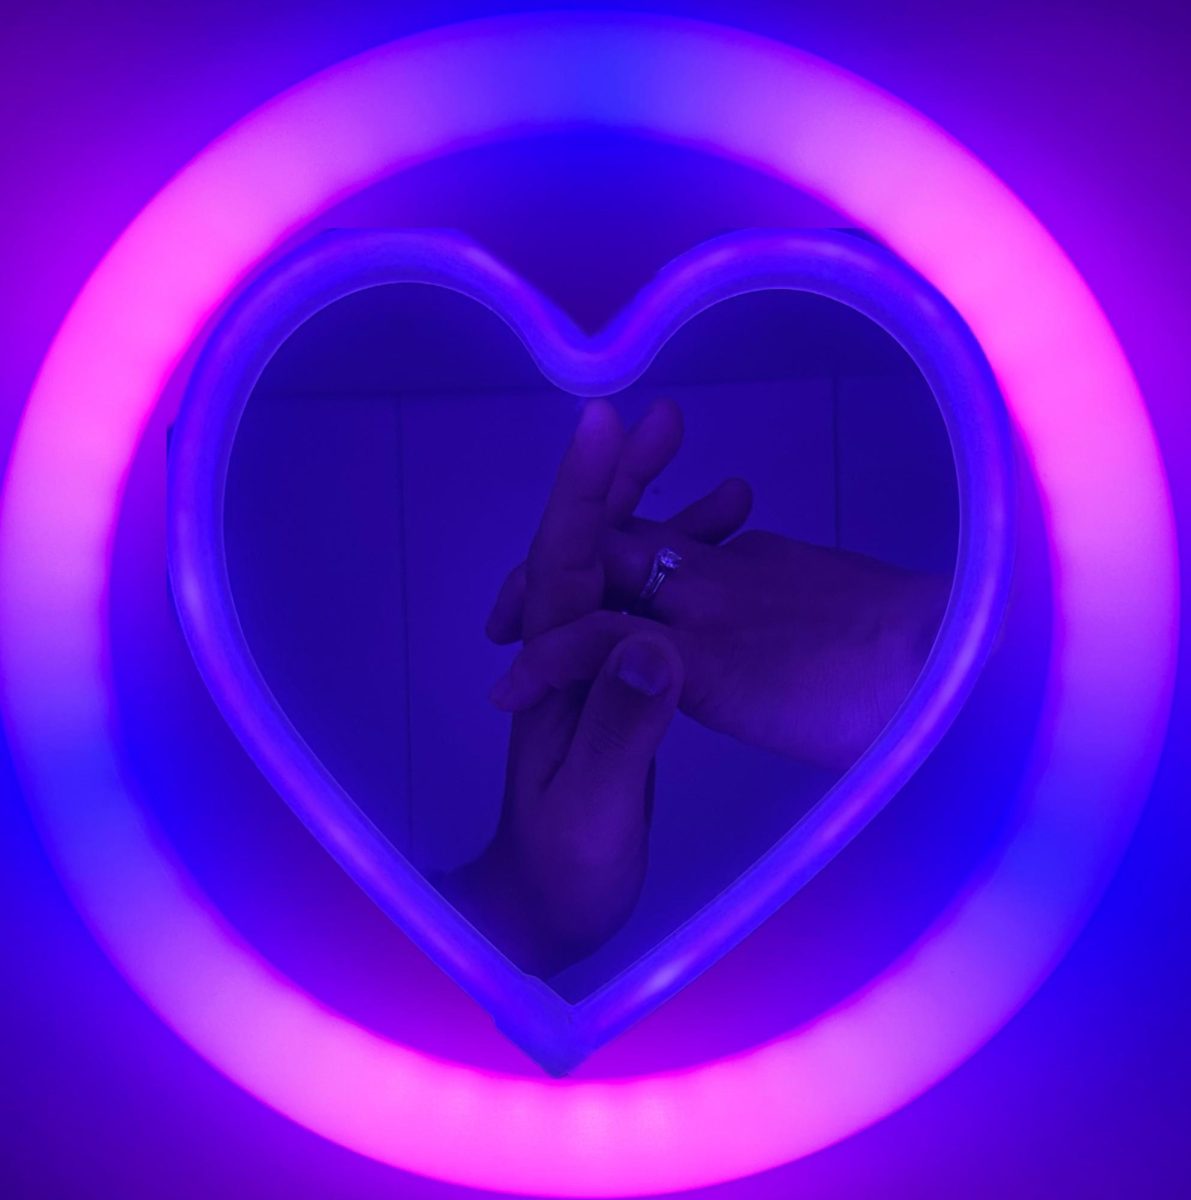 Photo+with+a+heart+and+purple+lighting+of+Sabrina%E2%80%99s+parent%E2%80%99s+hands%2C+they+met+on+a+dating+app.+